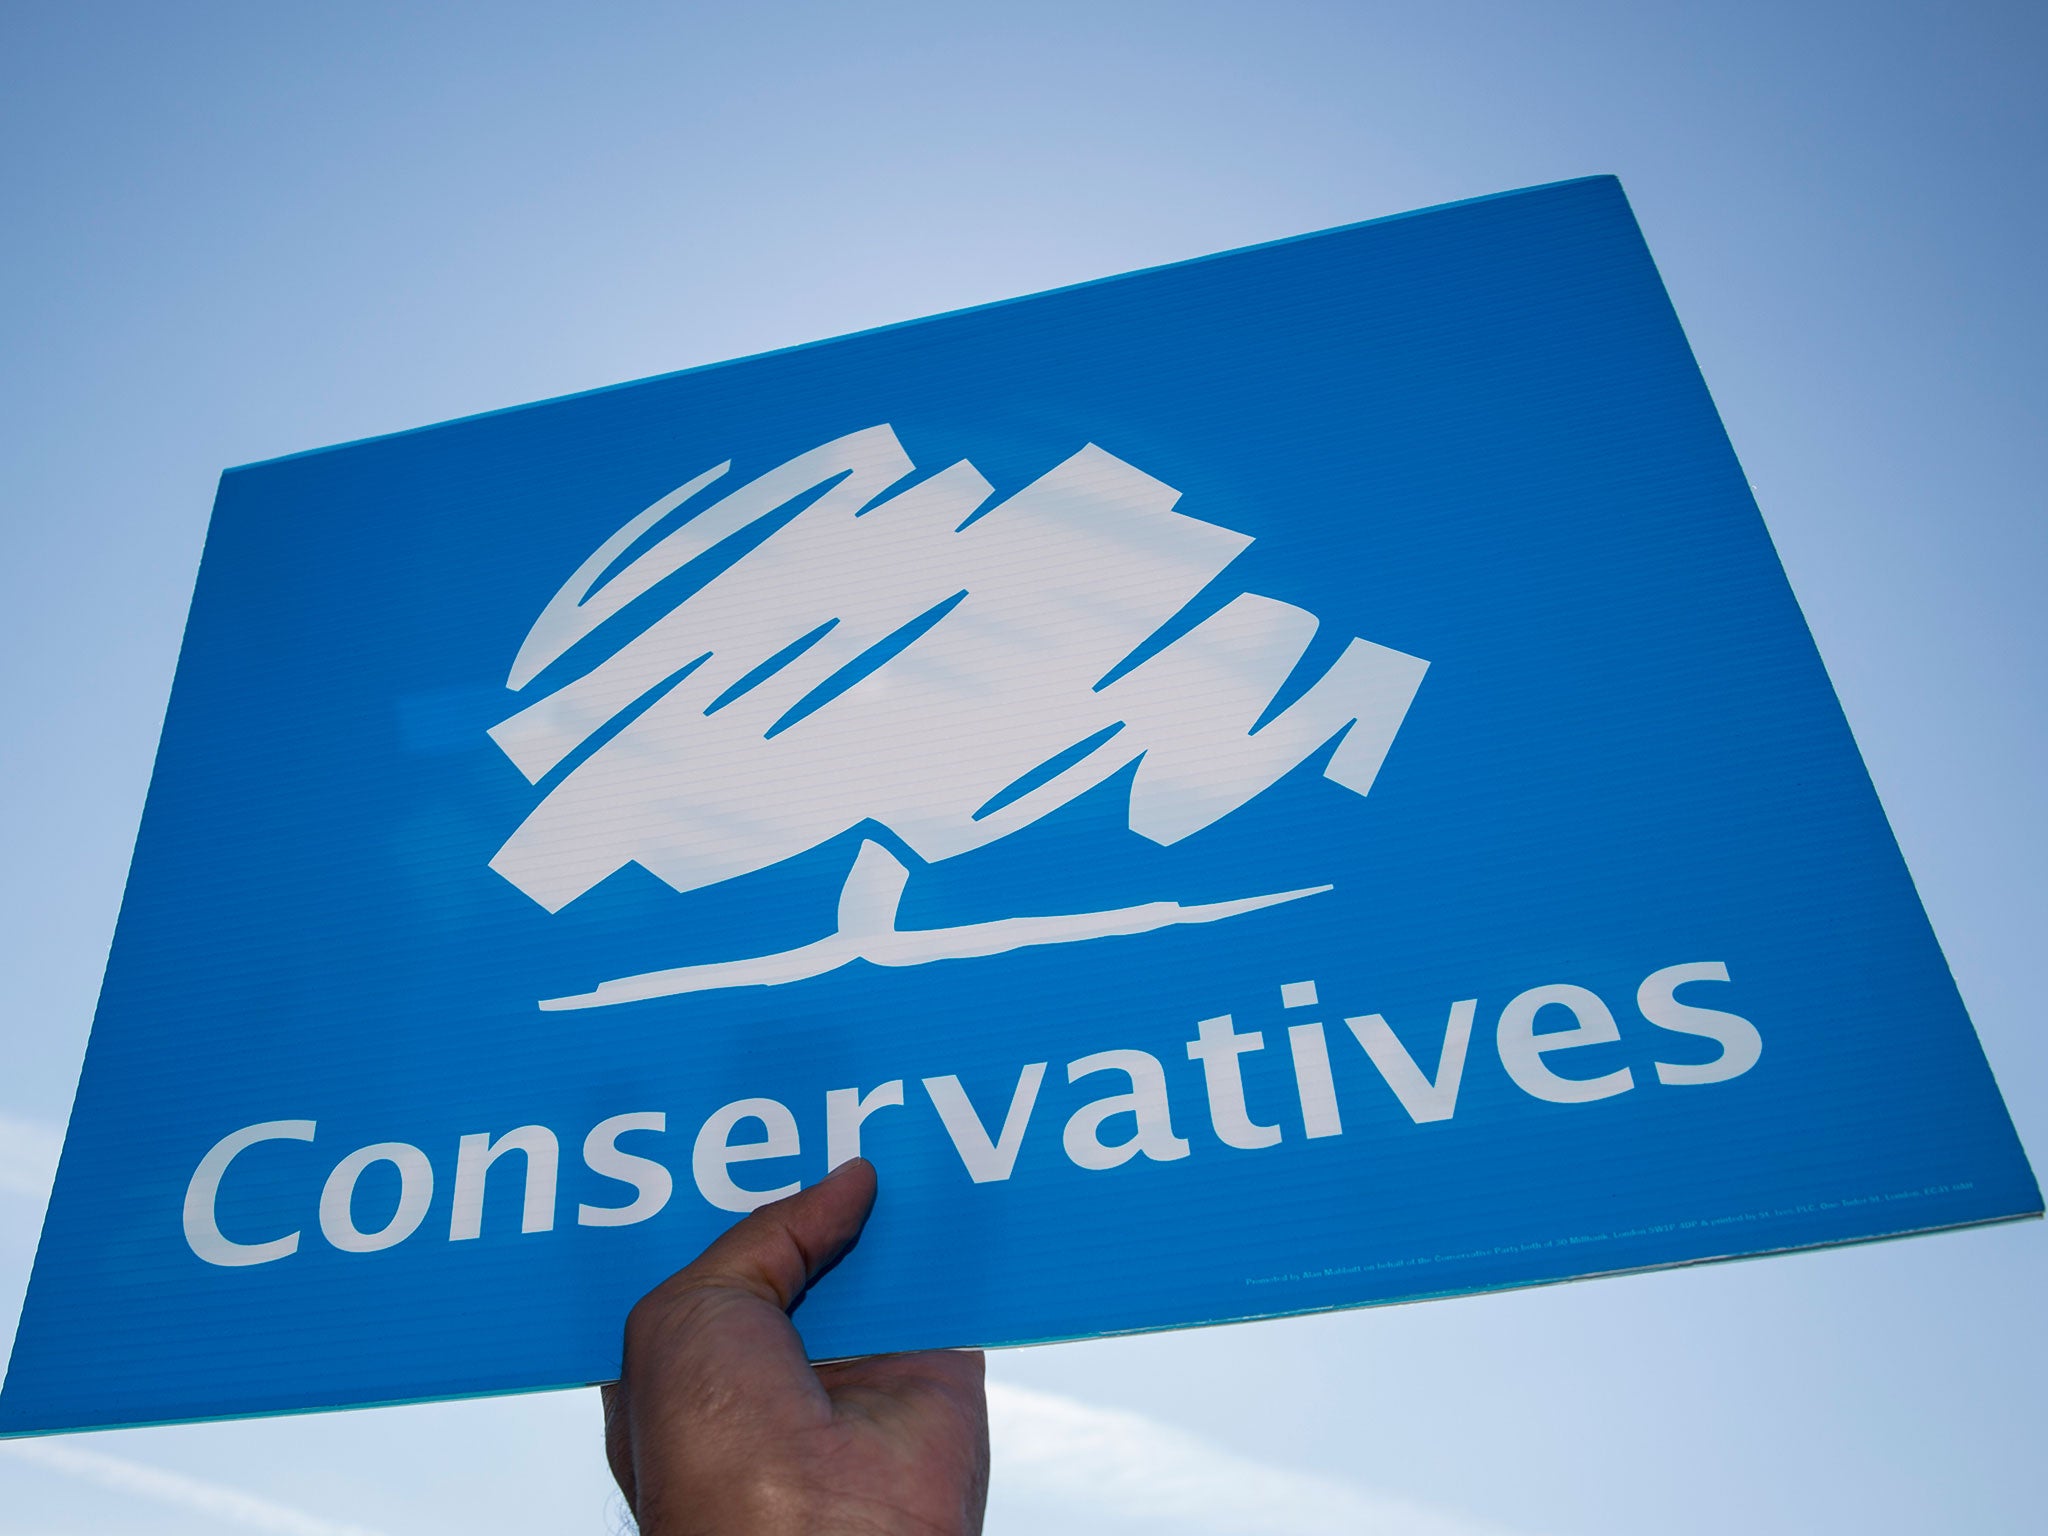 51 Tory MPs declared donations to their constituency parties from the United and Cecil Club, ranging from £1,000 to £10,000, in the first three months of 2015